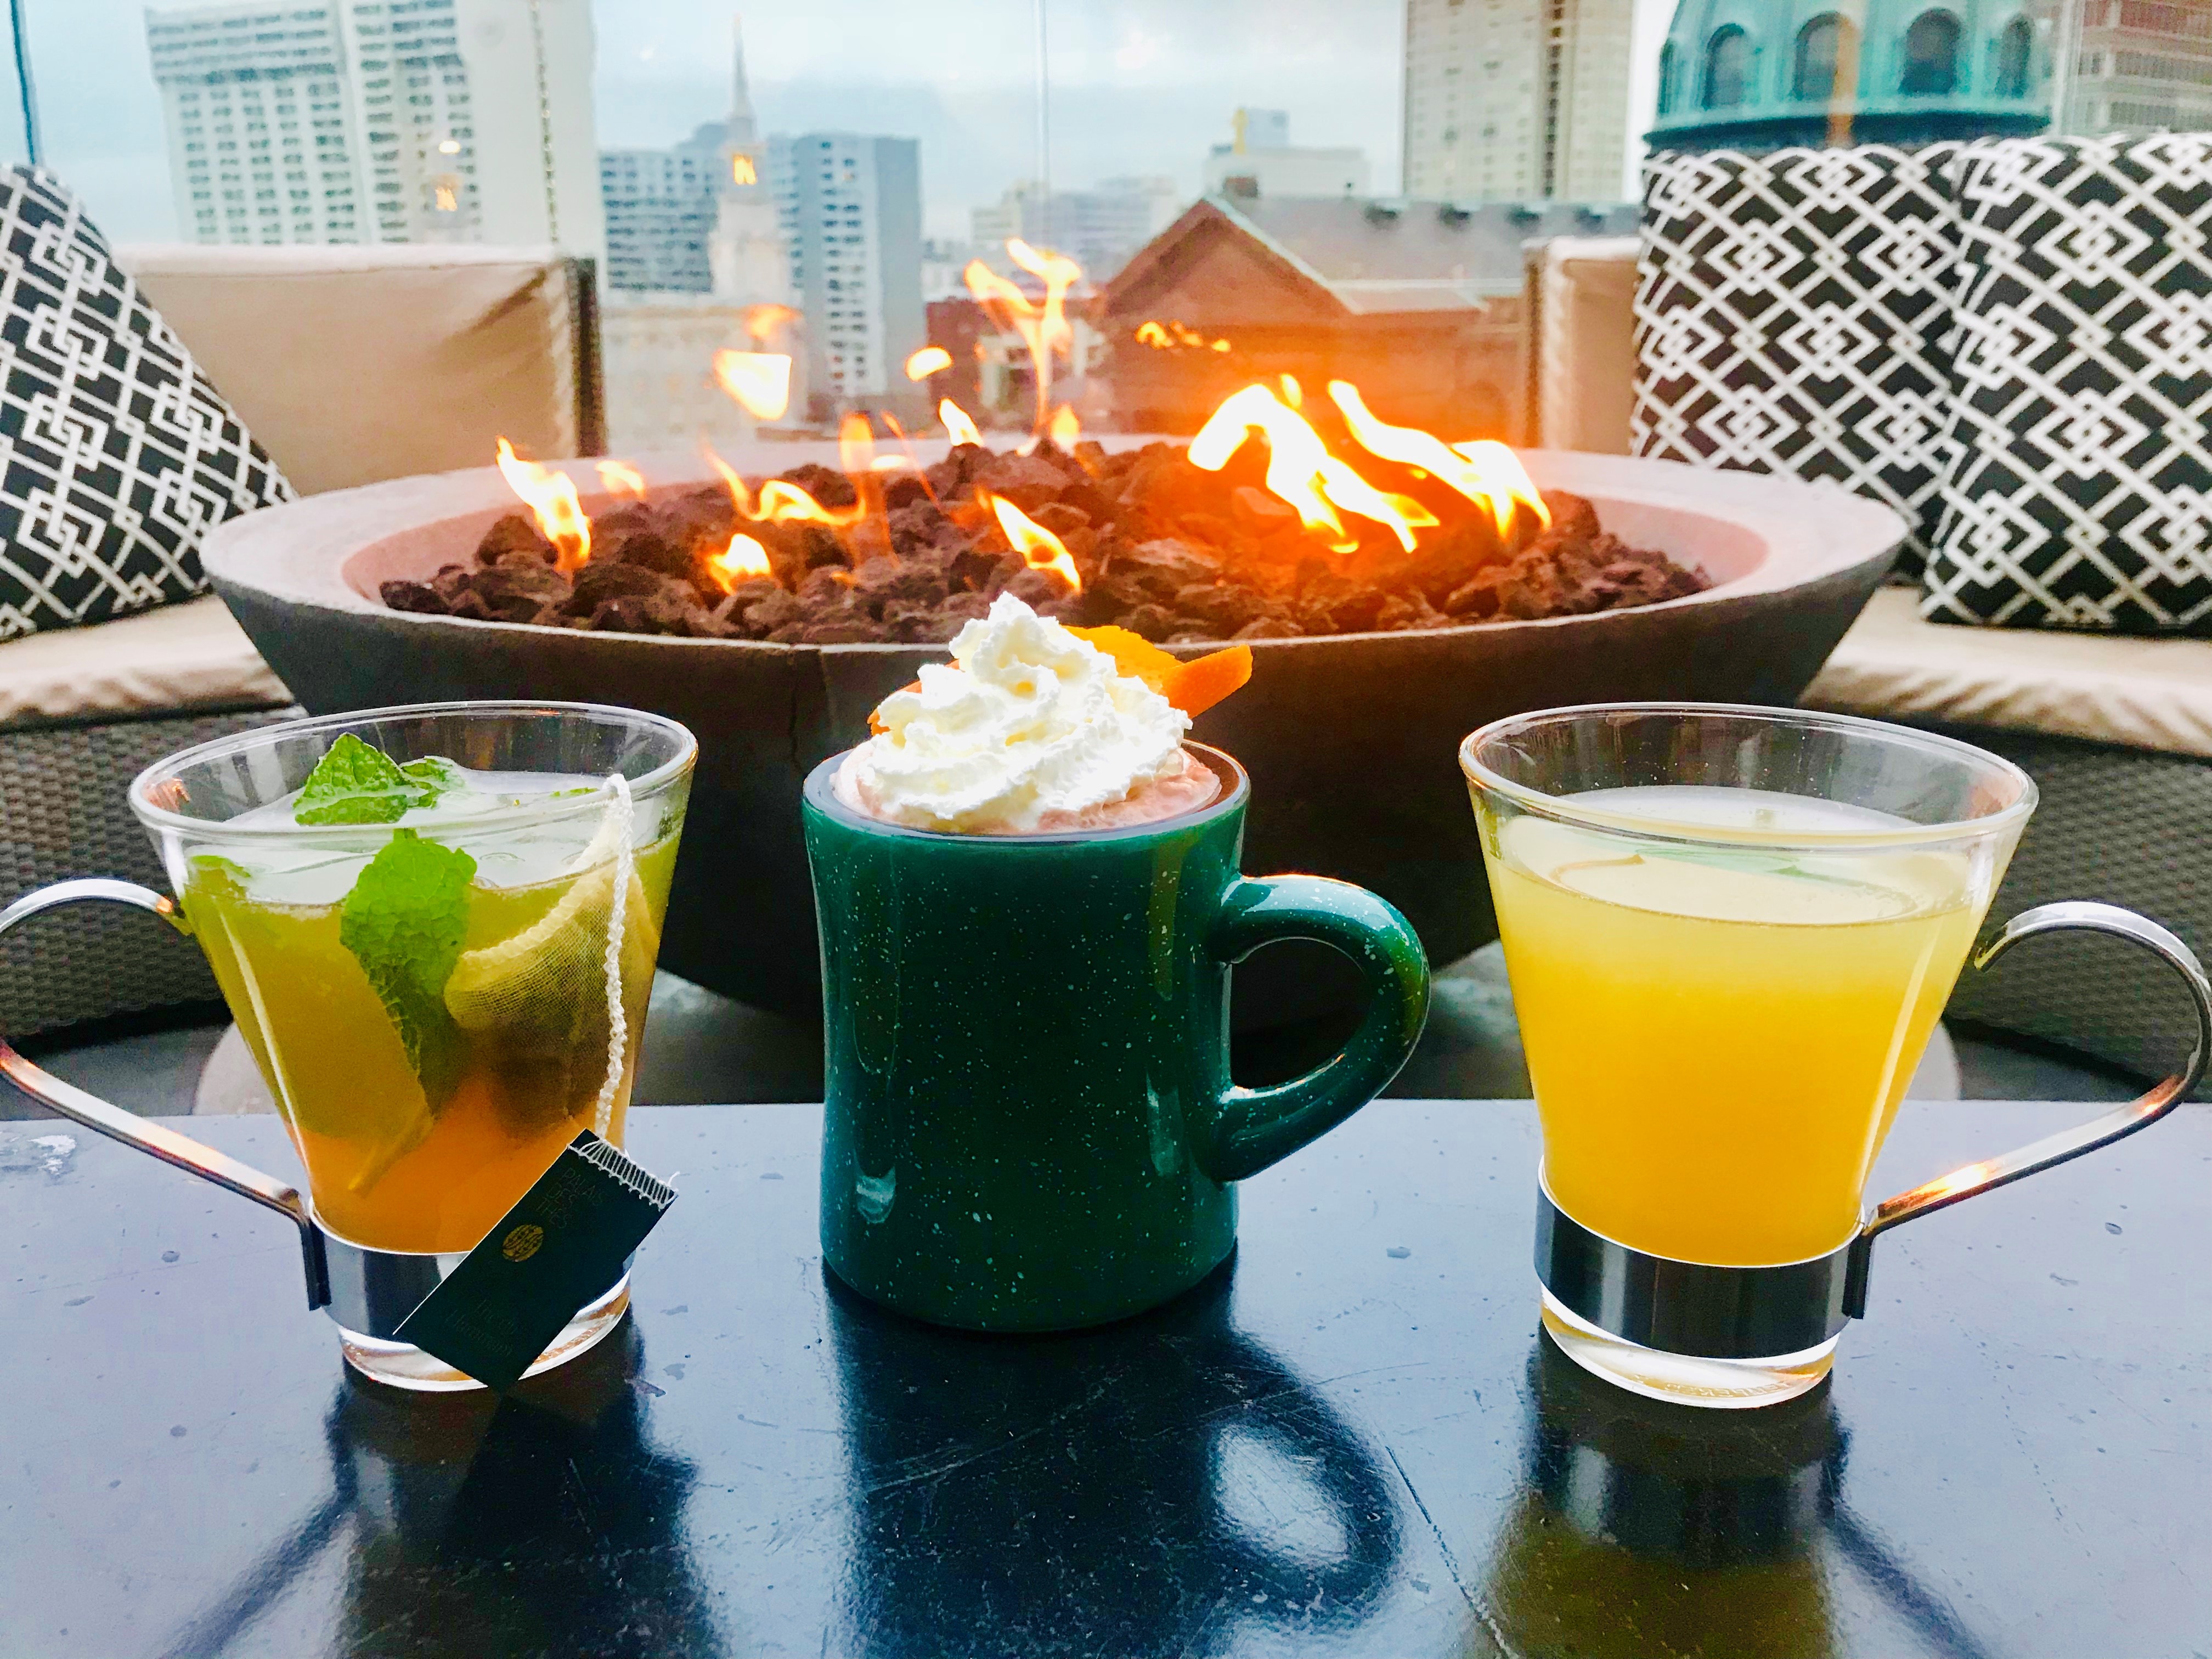 Warm up this winter at Assembly Rooftop Lounge